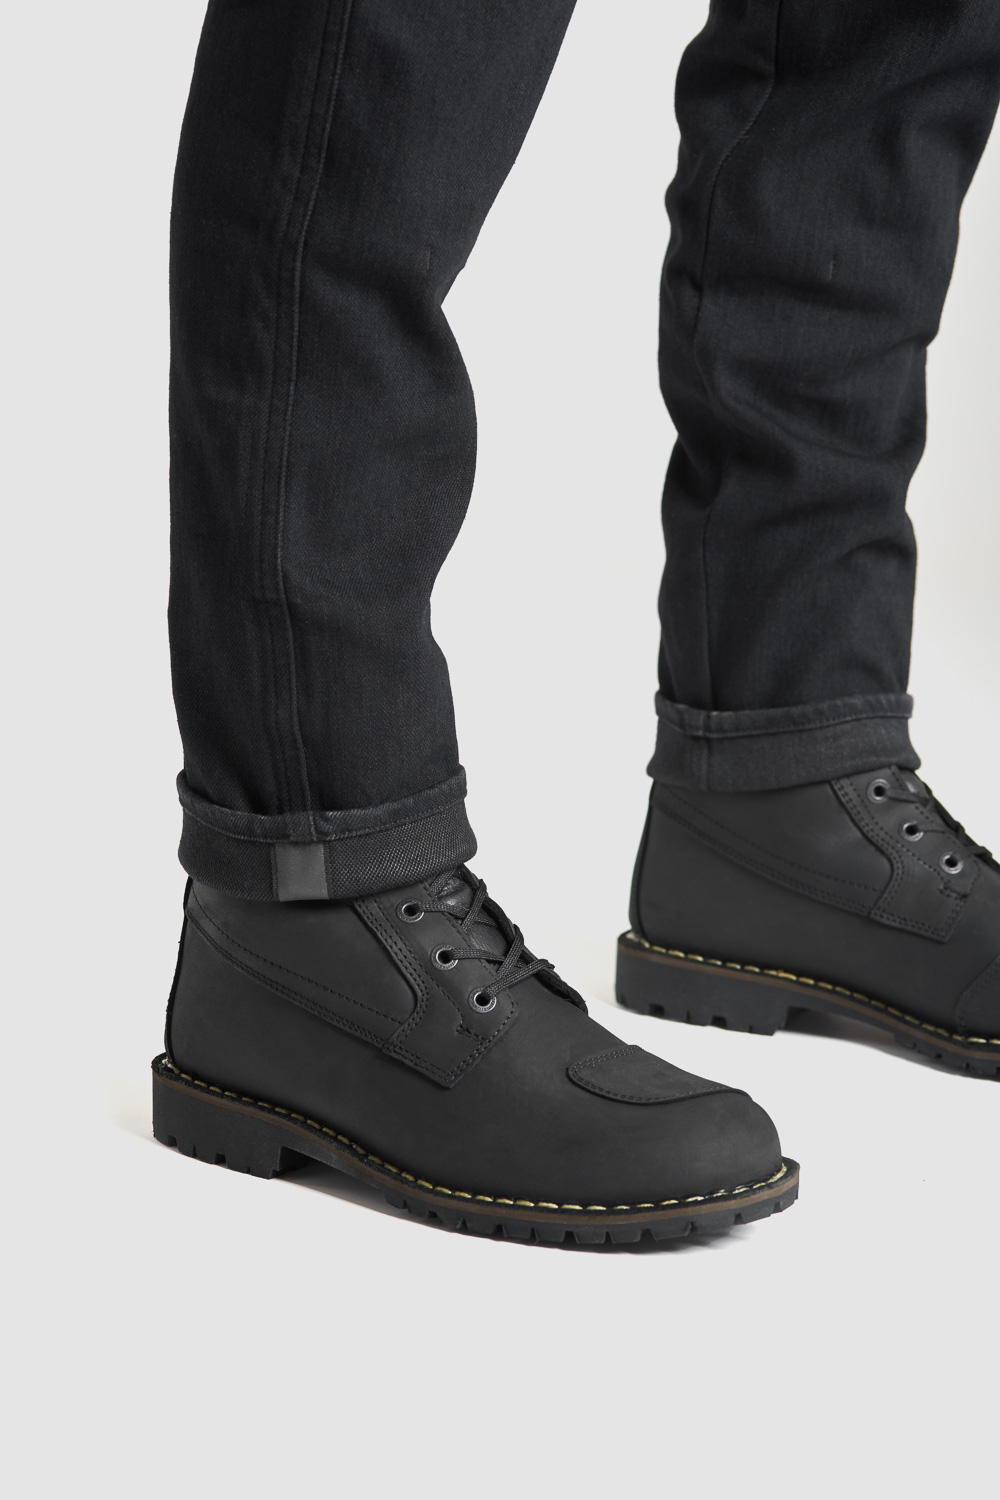 Steel Black 02 Motorcycle Jeans with combination of boots